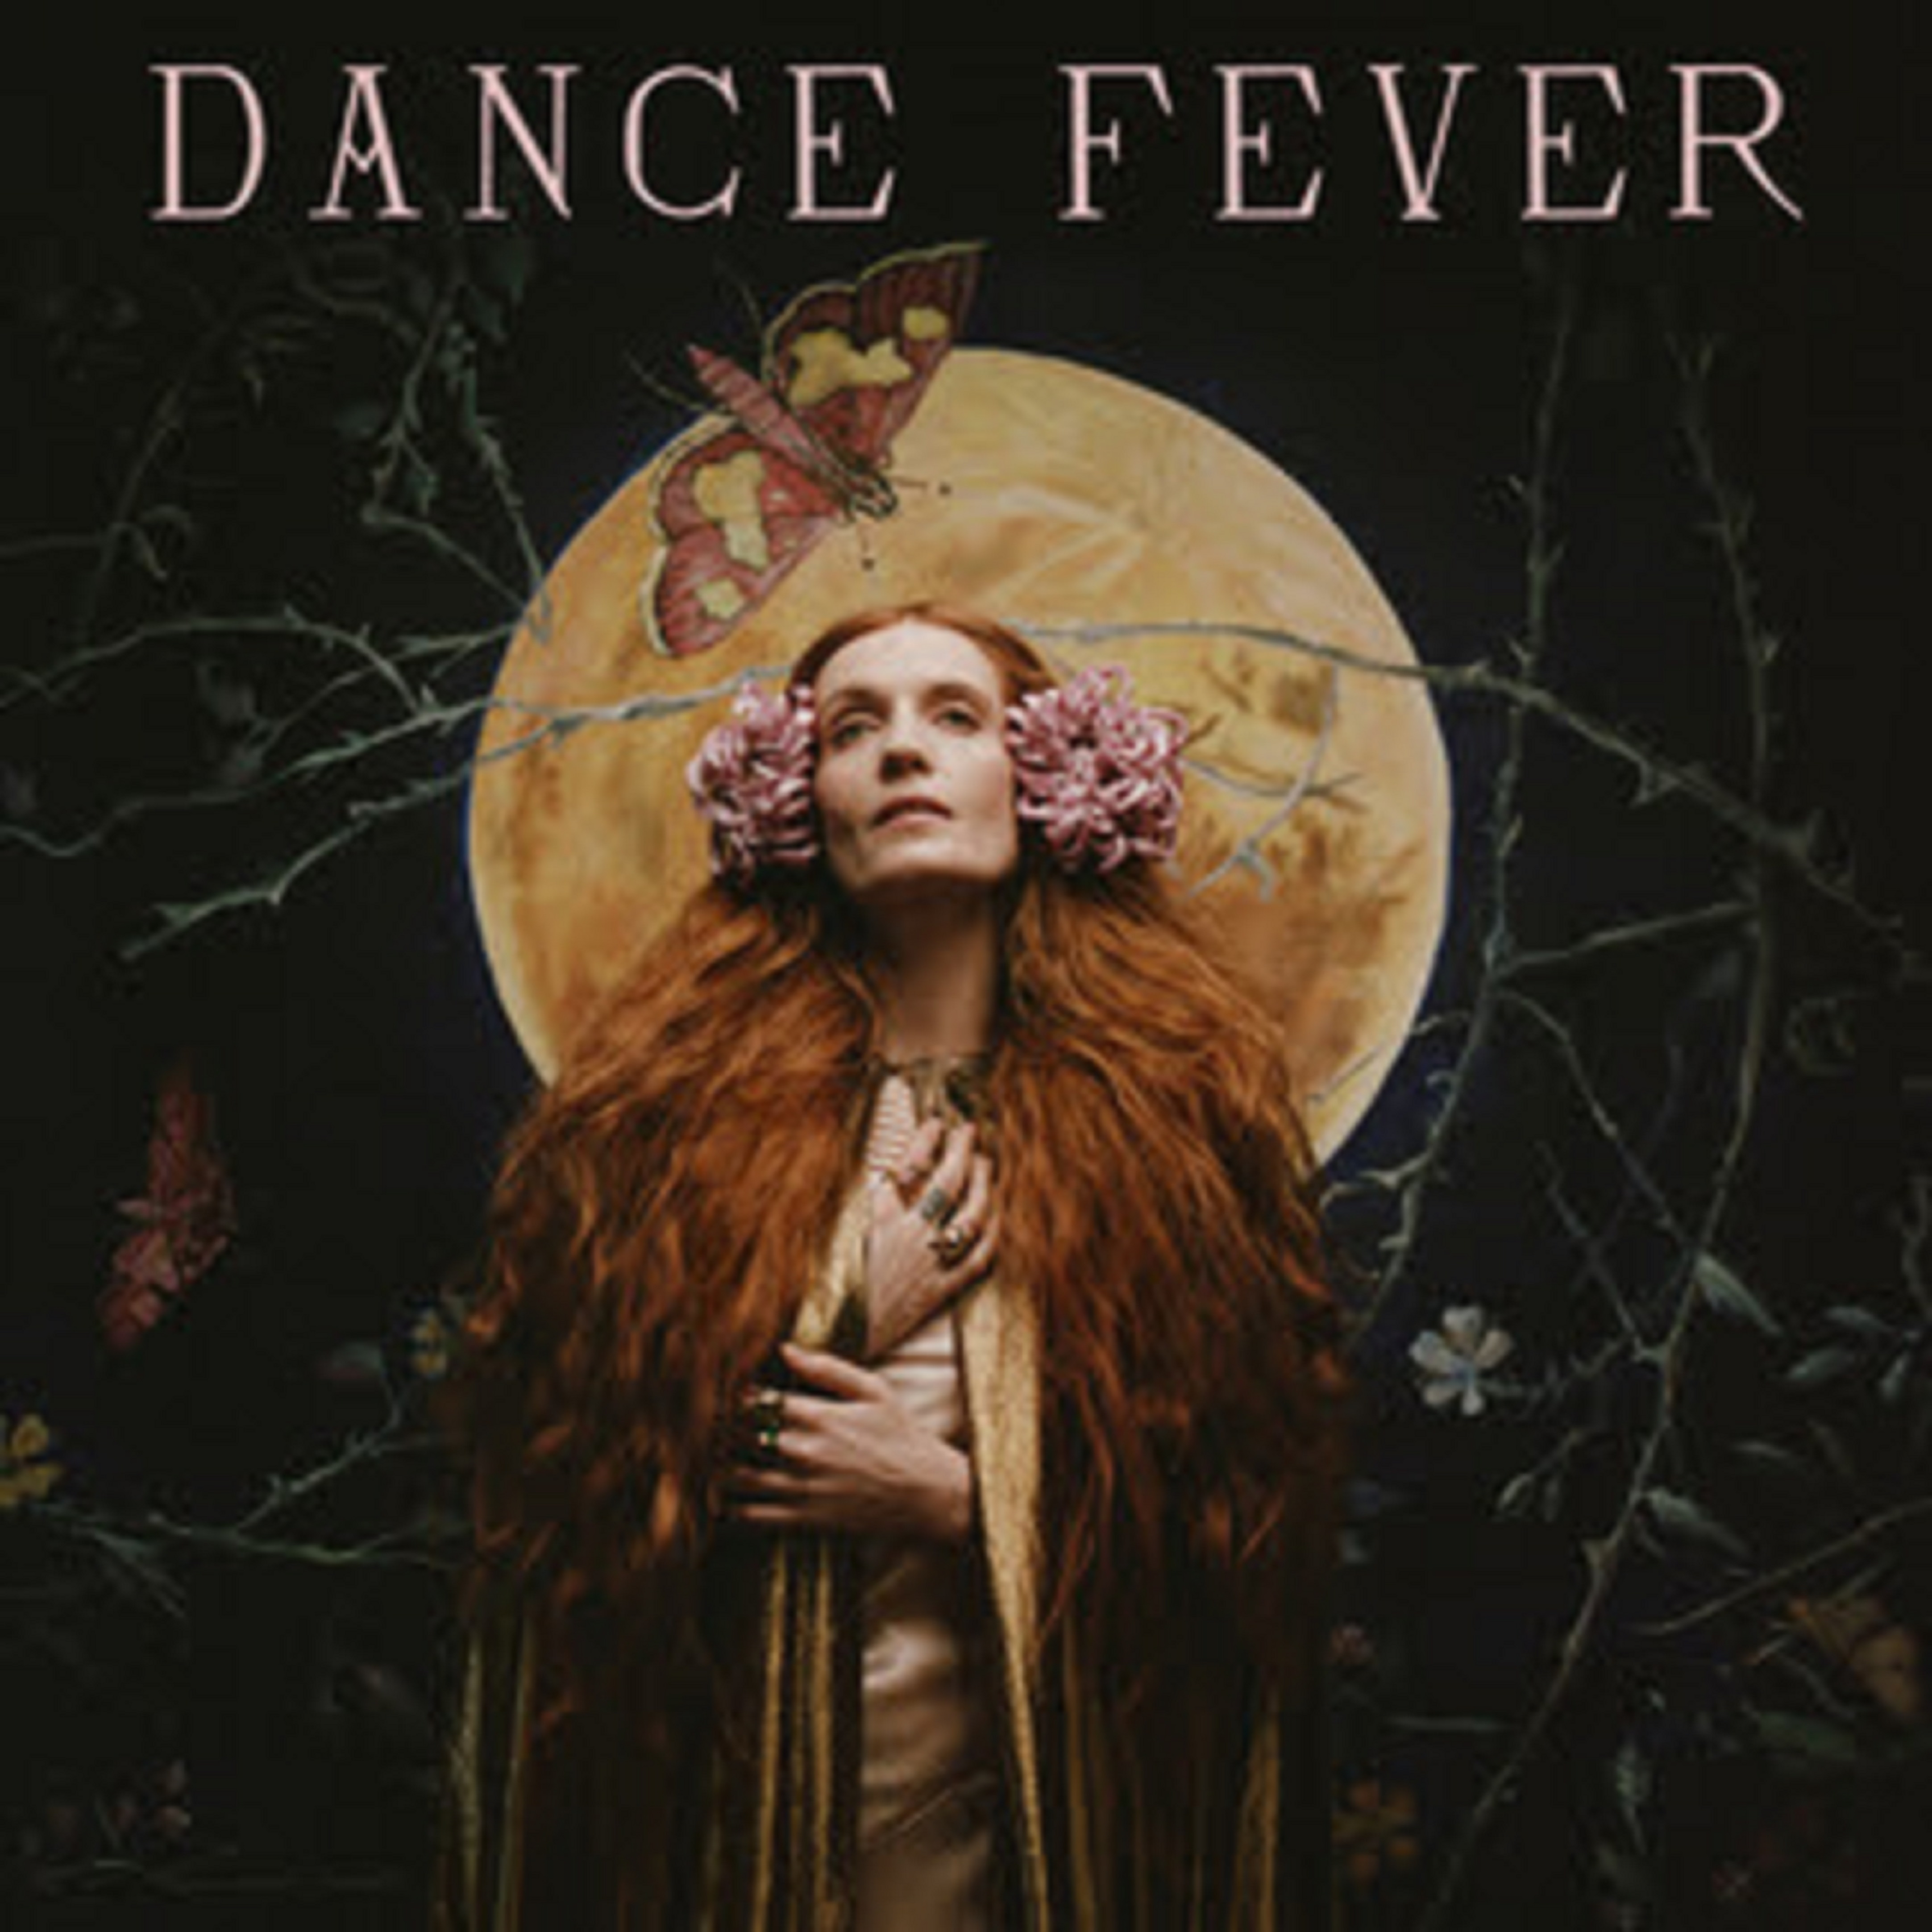 Florence + the Machine's Dance Fever debuts at #1 on Billboard Alternative, Rock Charts, #7 on Billboard 200